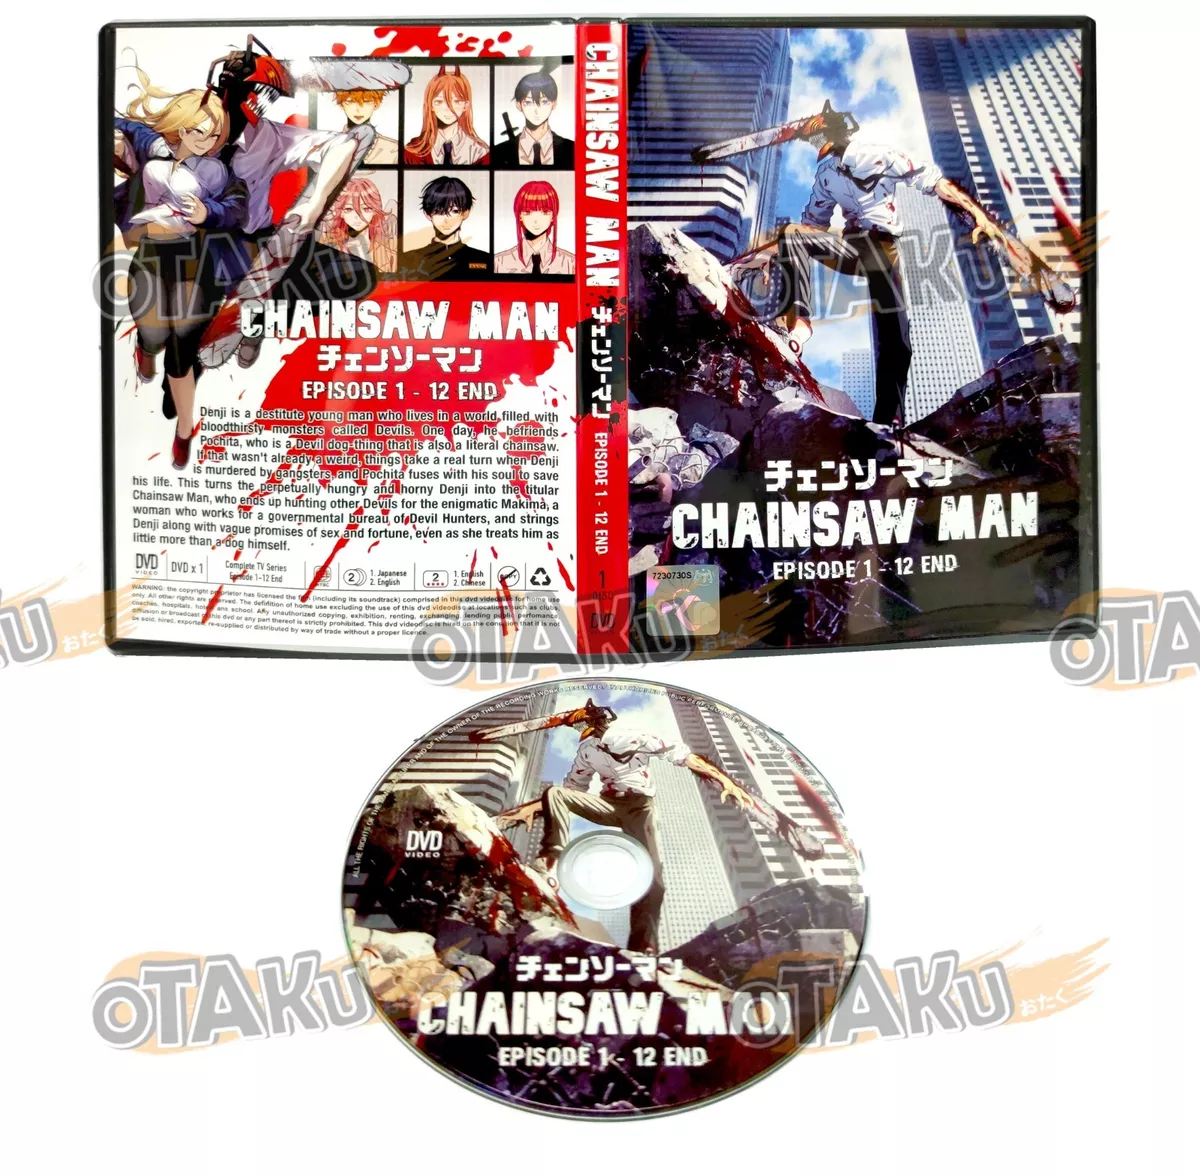 Chainsaw Man Episode 2 English Dub Release Date and Time on